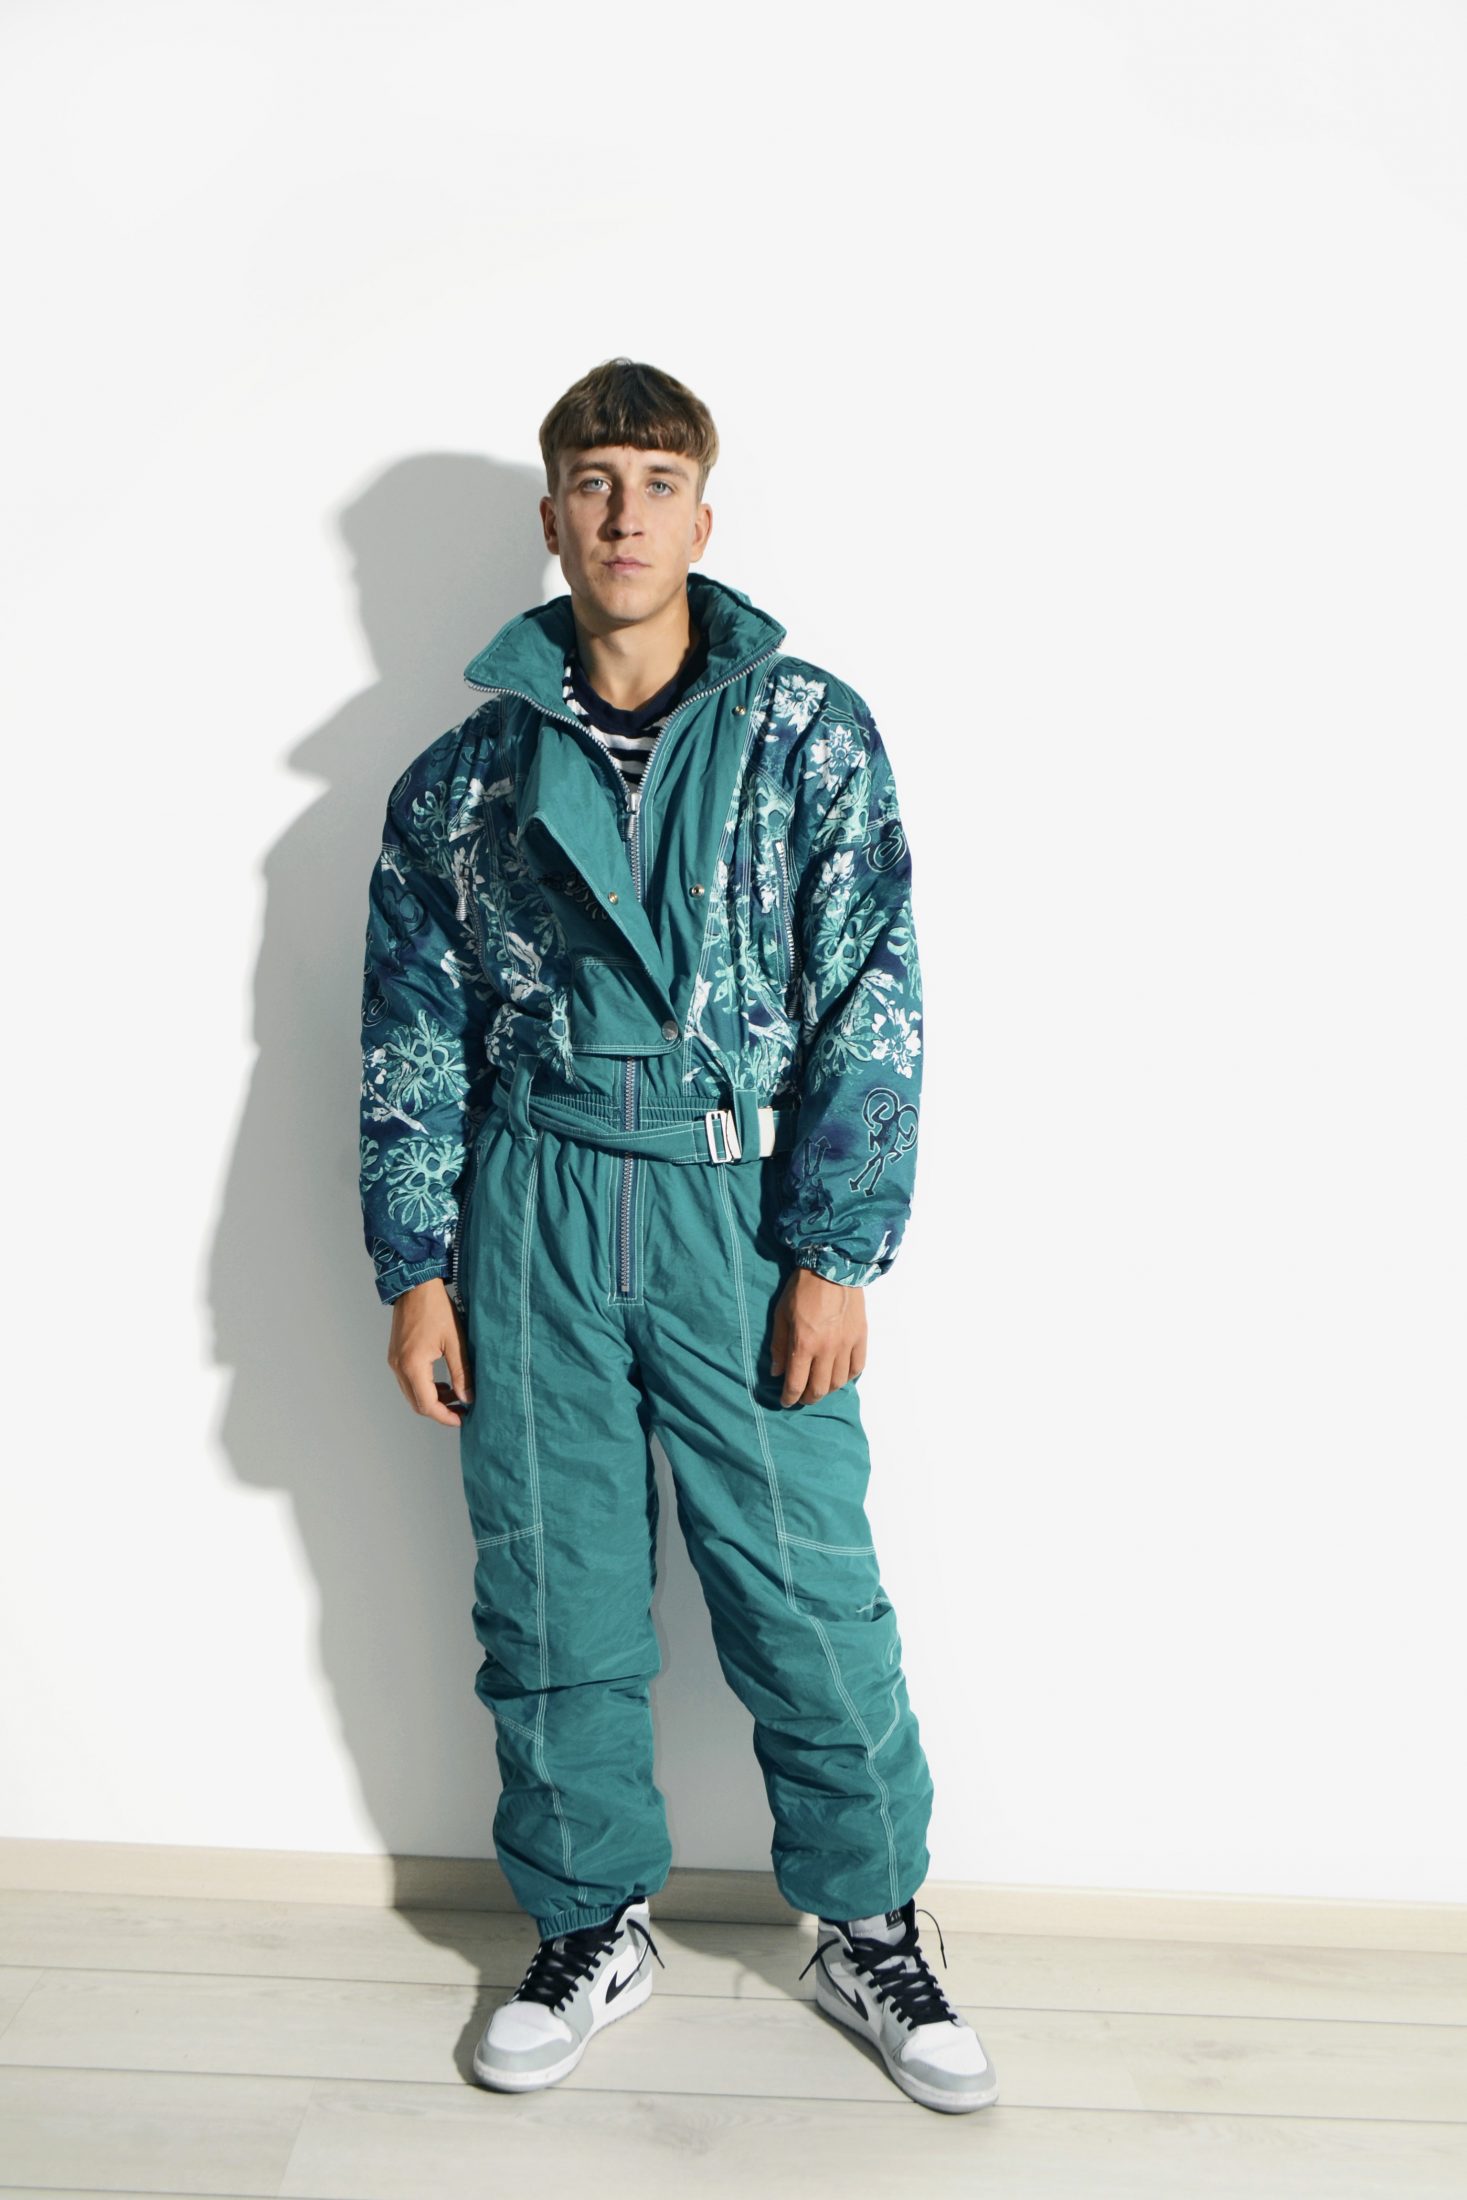 Retro abstract ski suit green overall 90s 80s fashion men outfit online ...